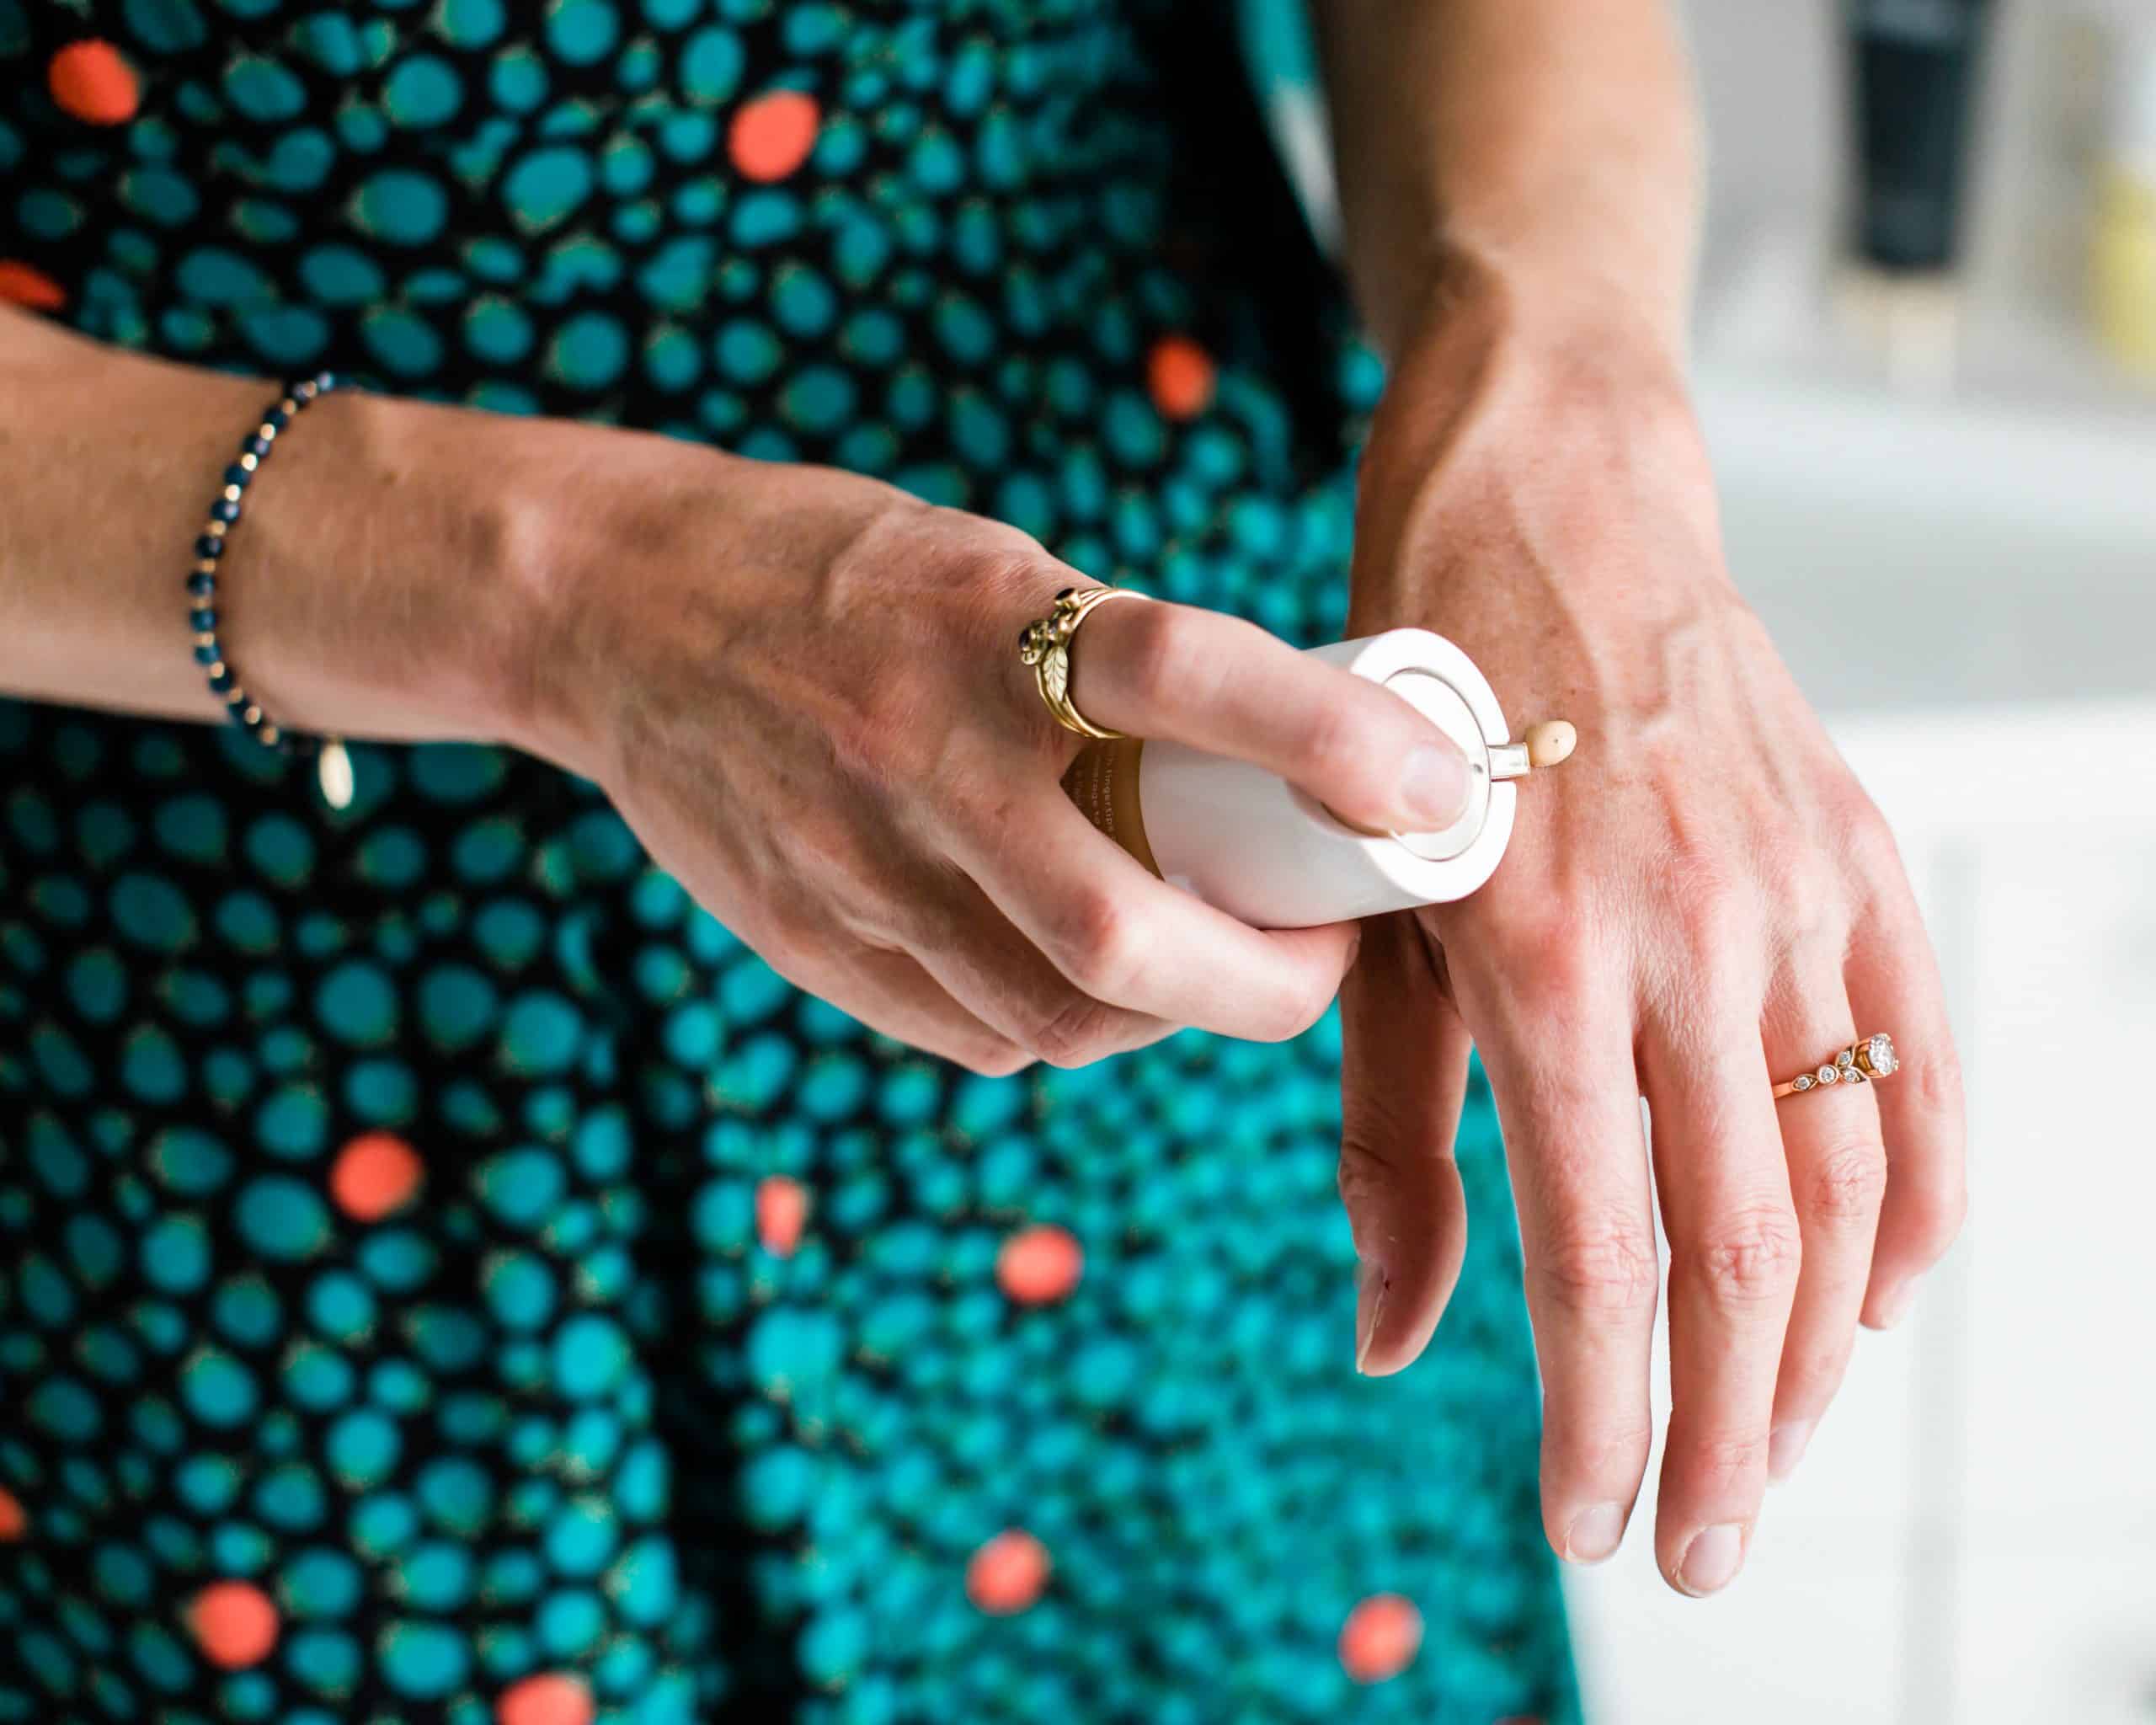 A girl putting a pump of Beautycounter foundation on the back of her hand.